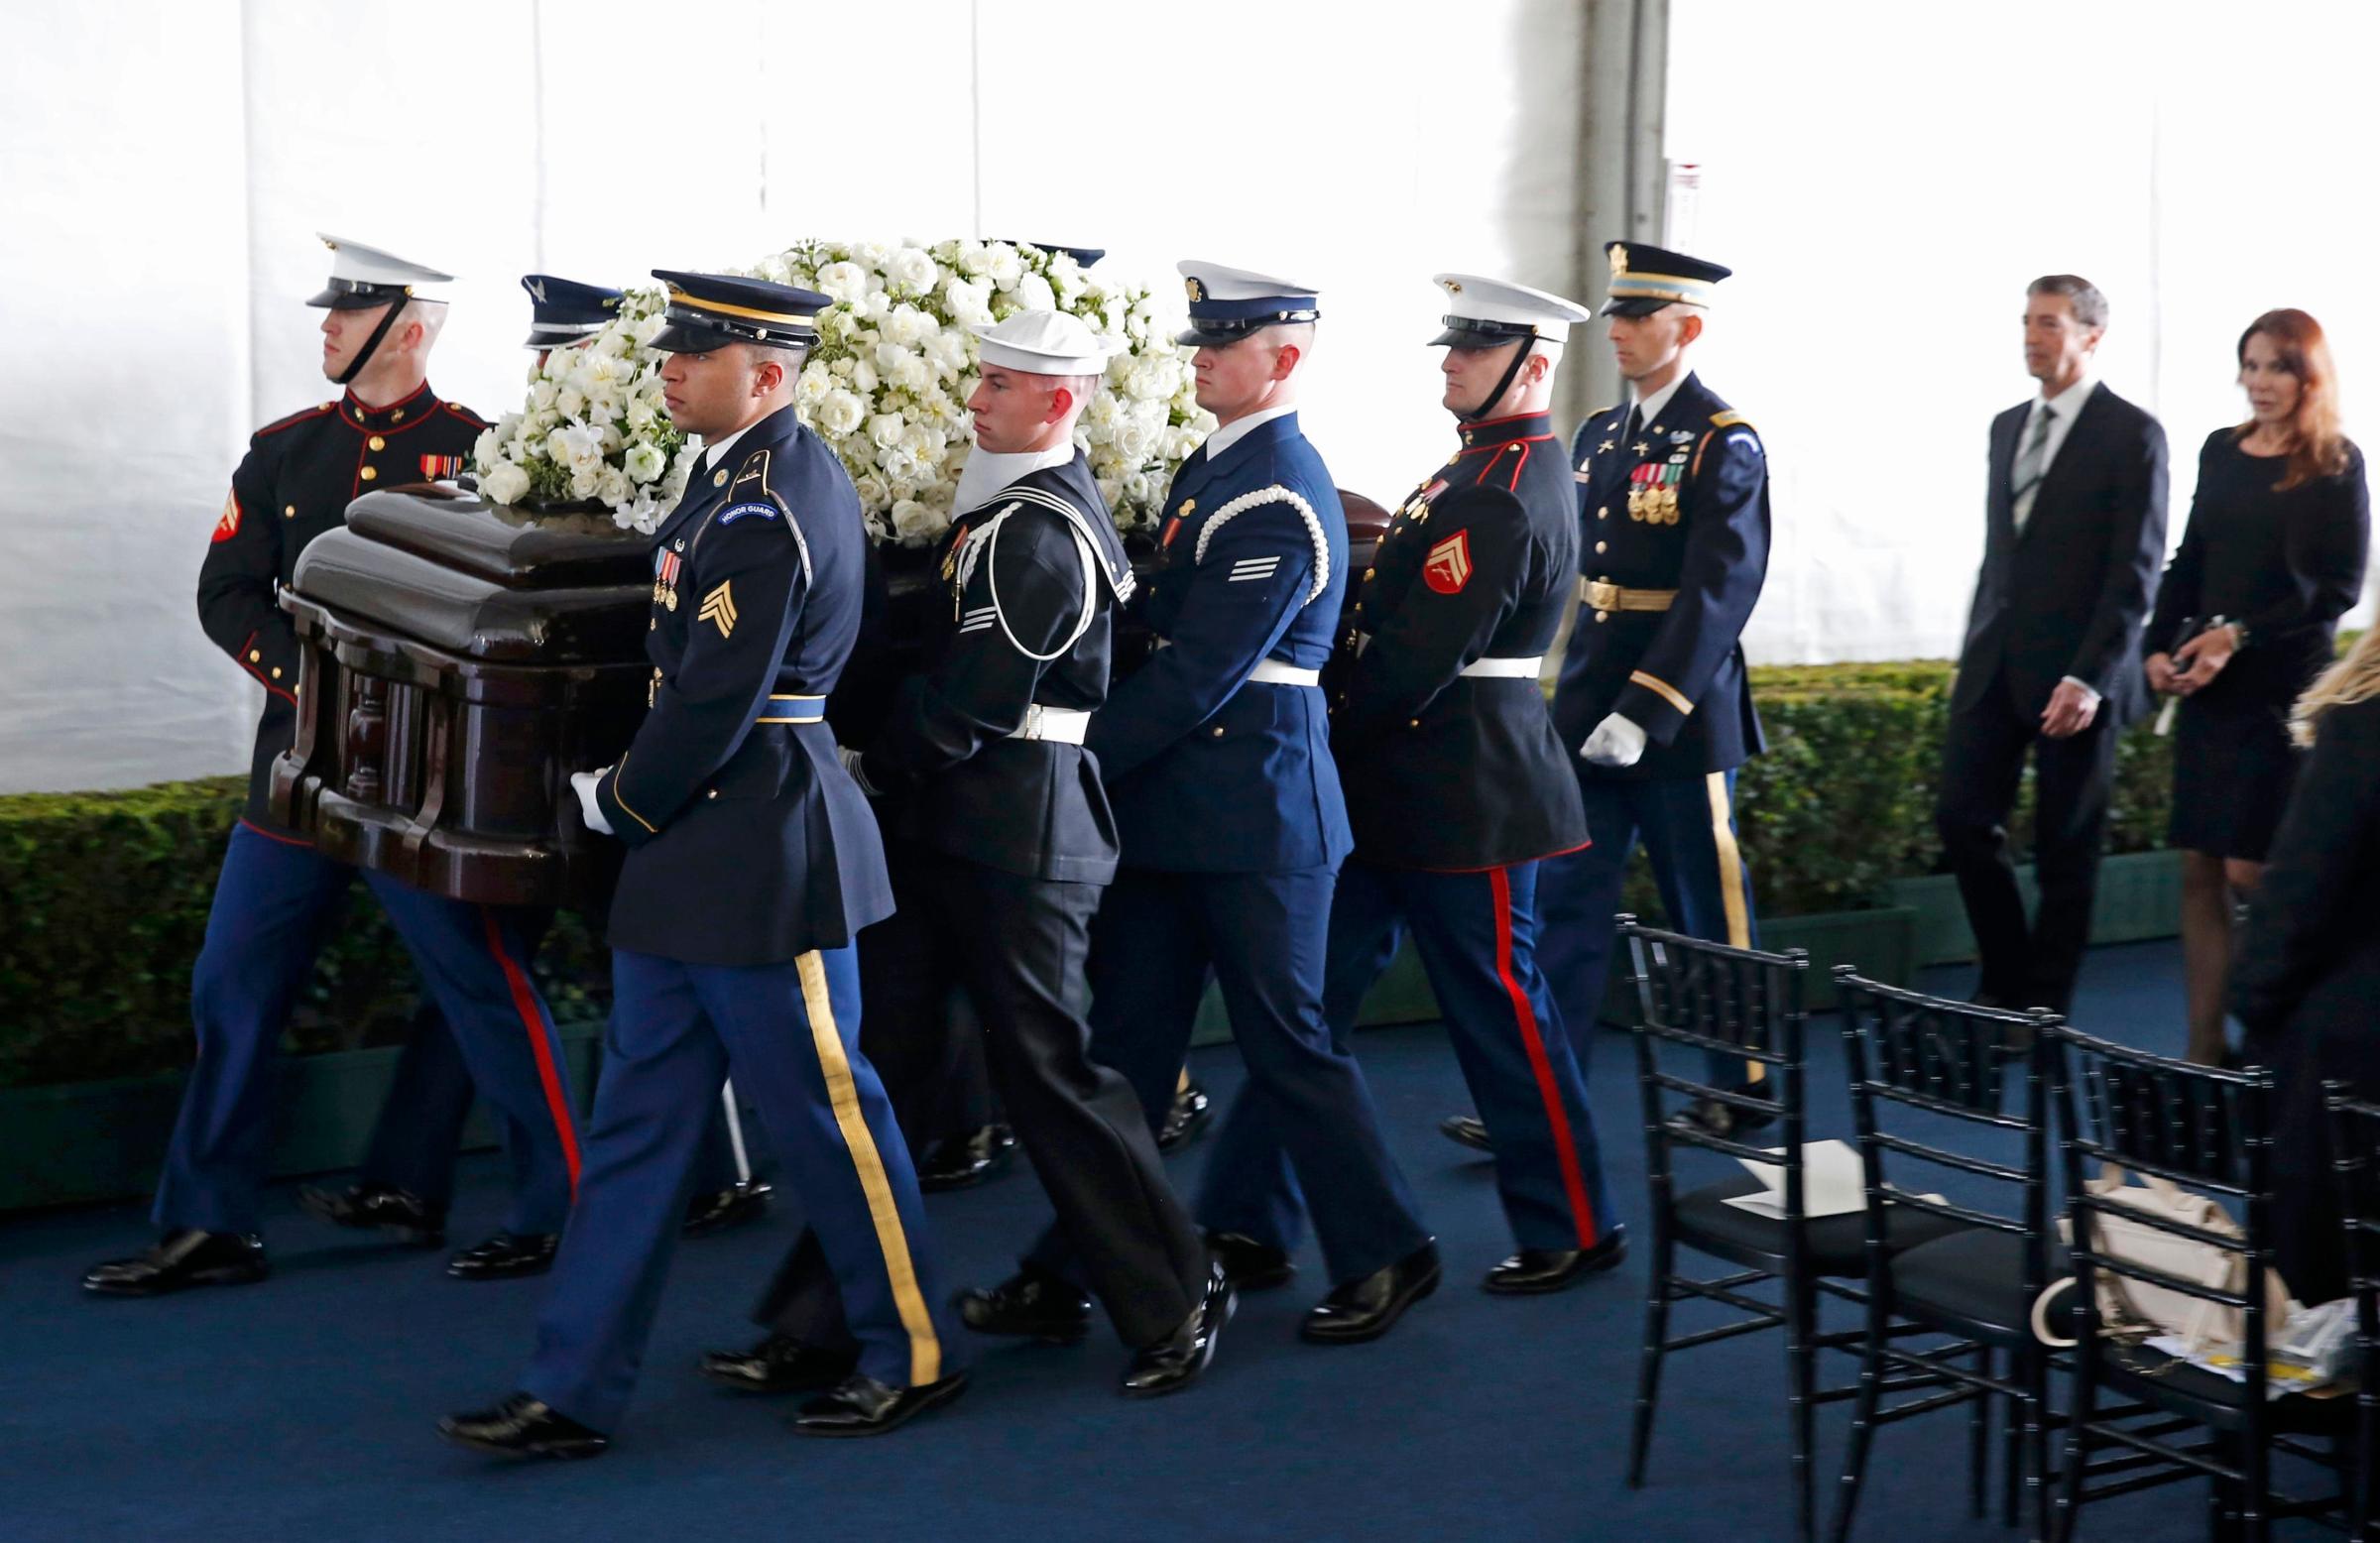 A military honor guard carries the casket after the funeral service for Nancy Reagan at the Ronald Reagan Presidential Library in Simi Valley, California